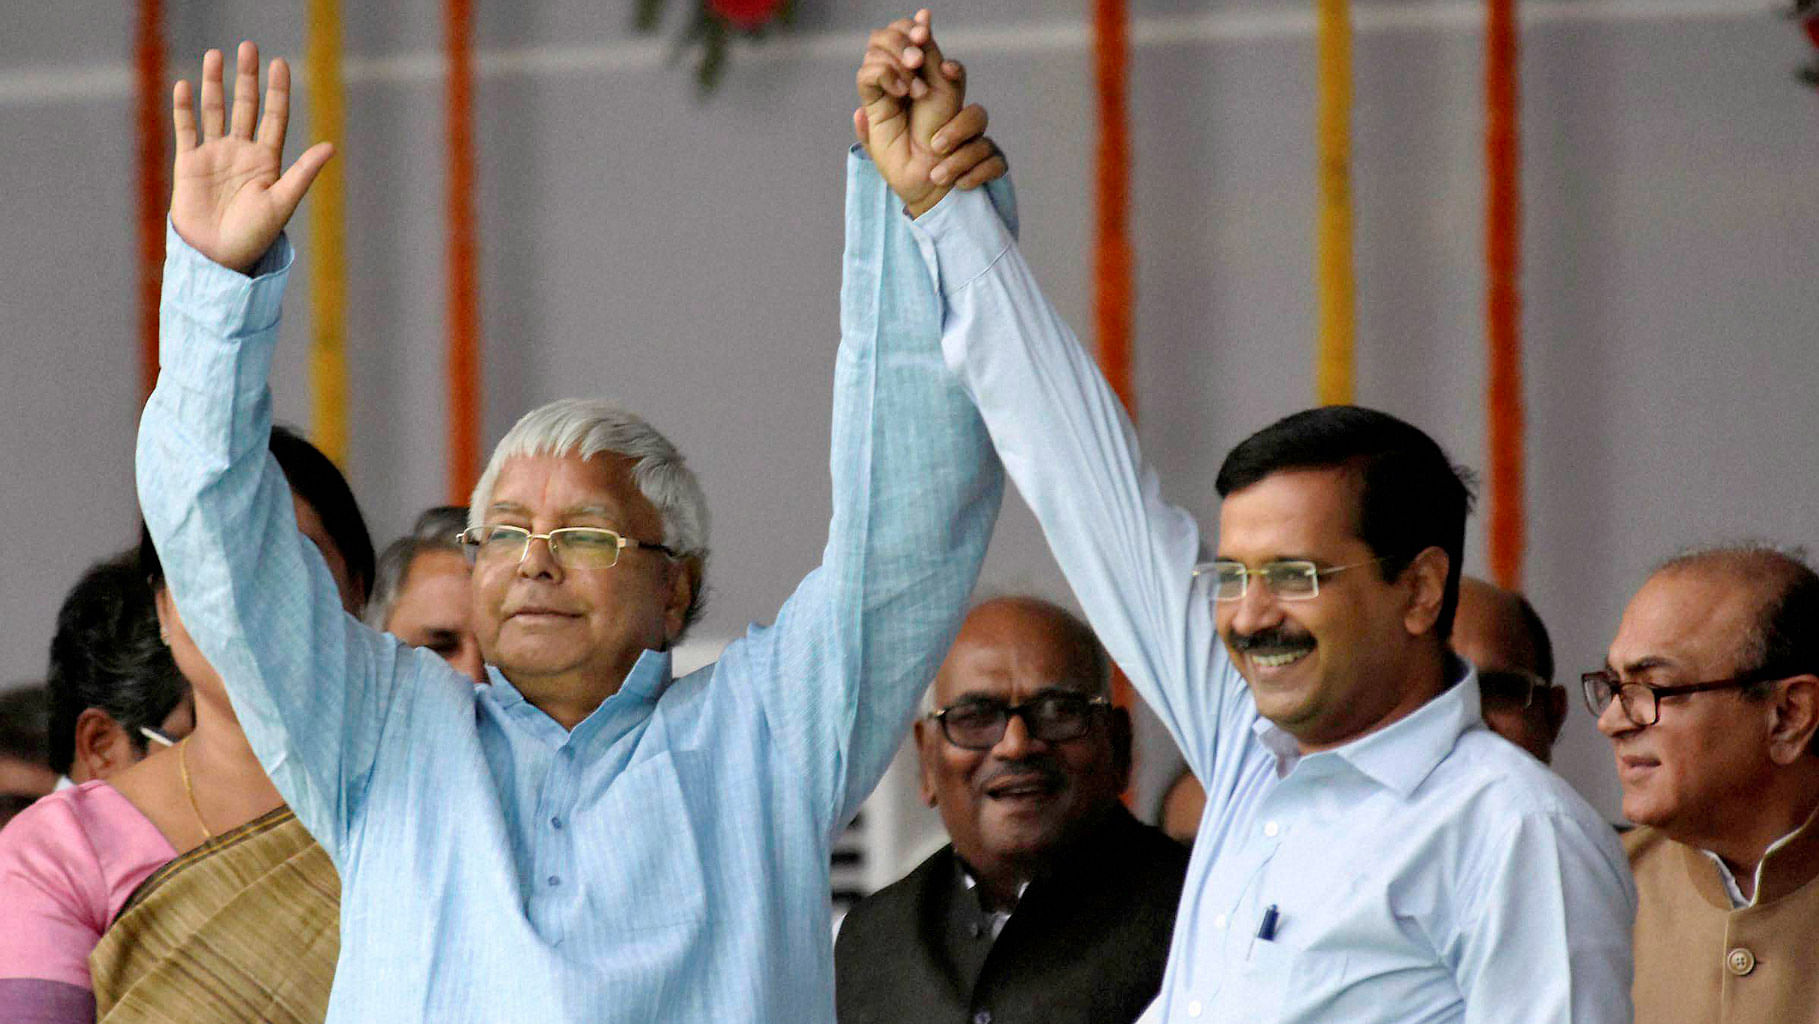 RJD chief Lalu Prasad with Delhi Chief Minister Arvind Kejriwal during the swearing-in ceremony of the new Bihar government at Gandhi Maidan in Patna, November 30, 2015. (Photo: PTI)